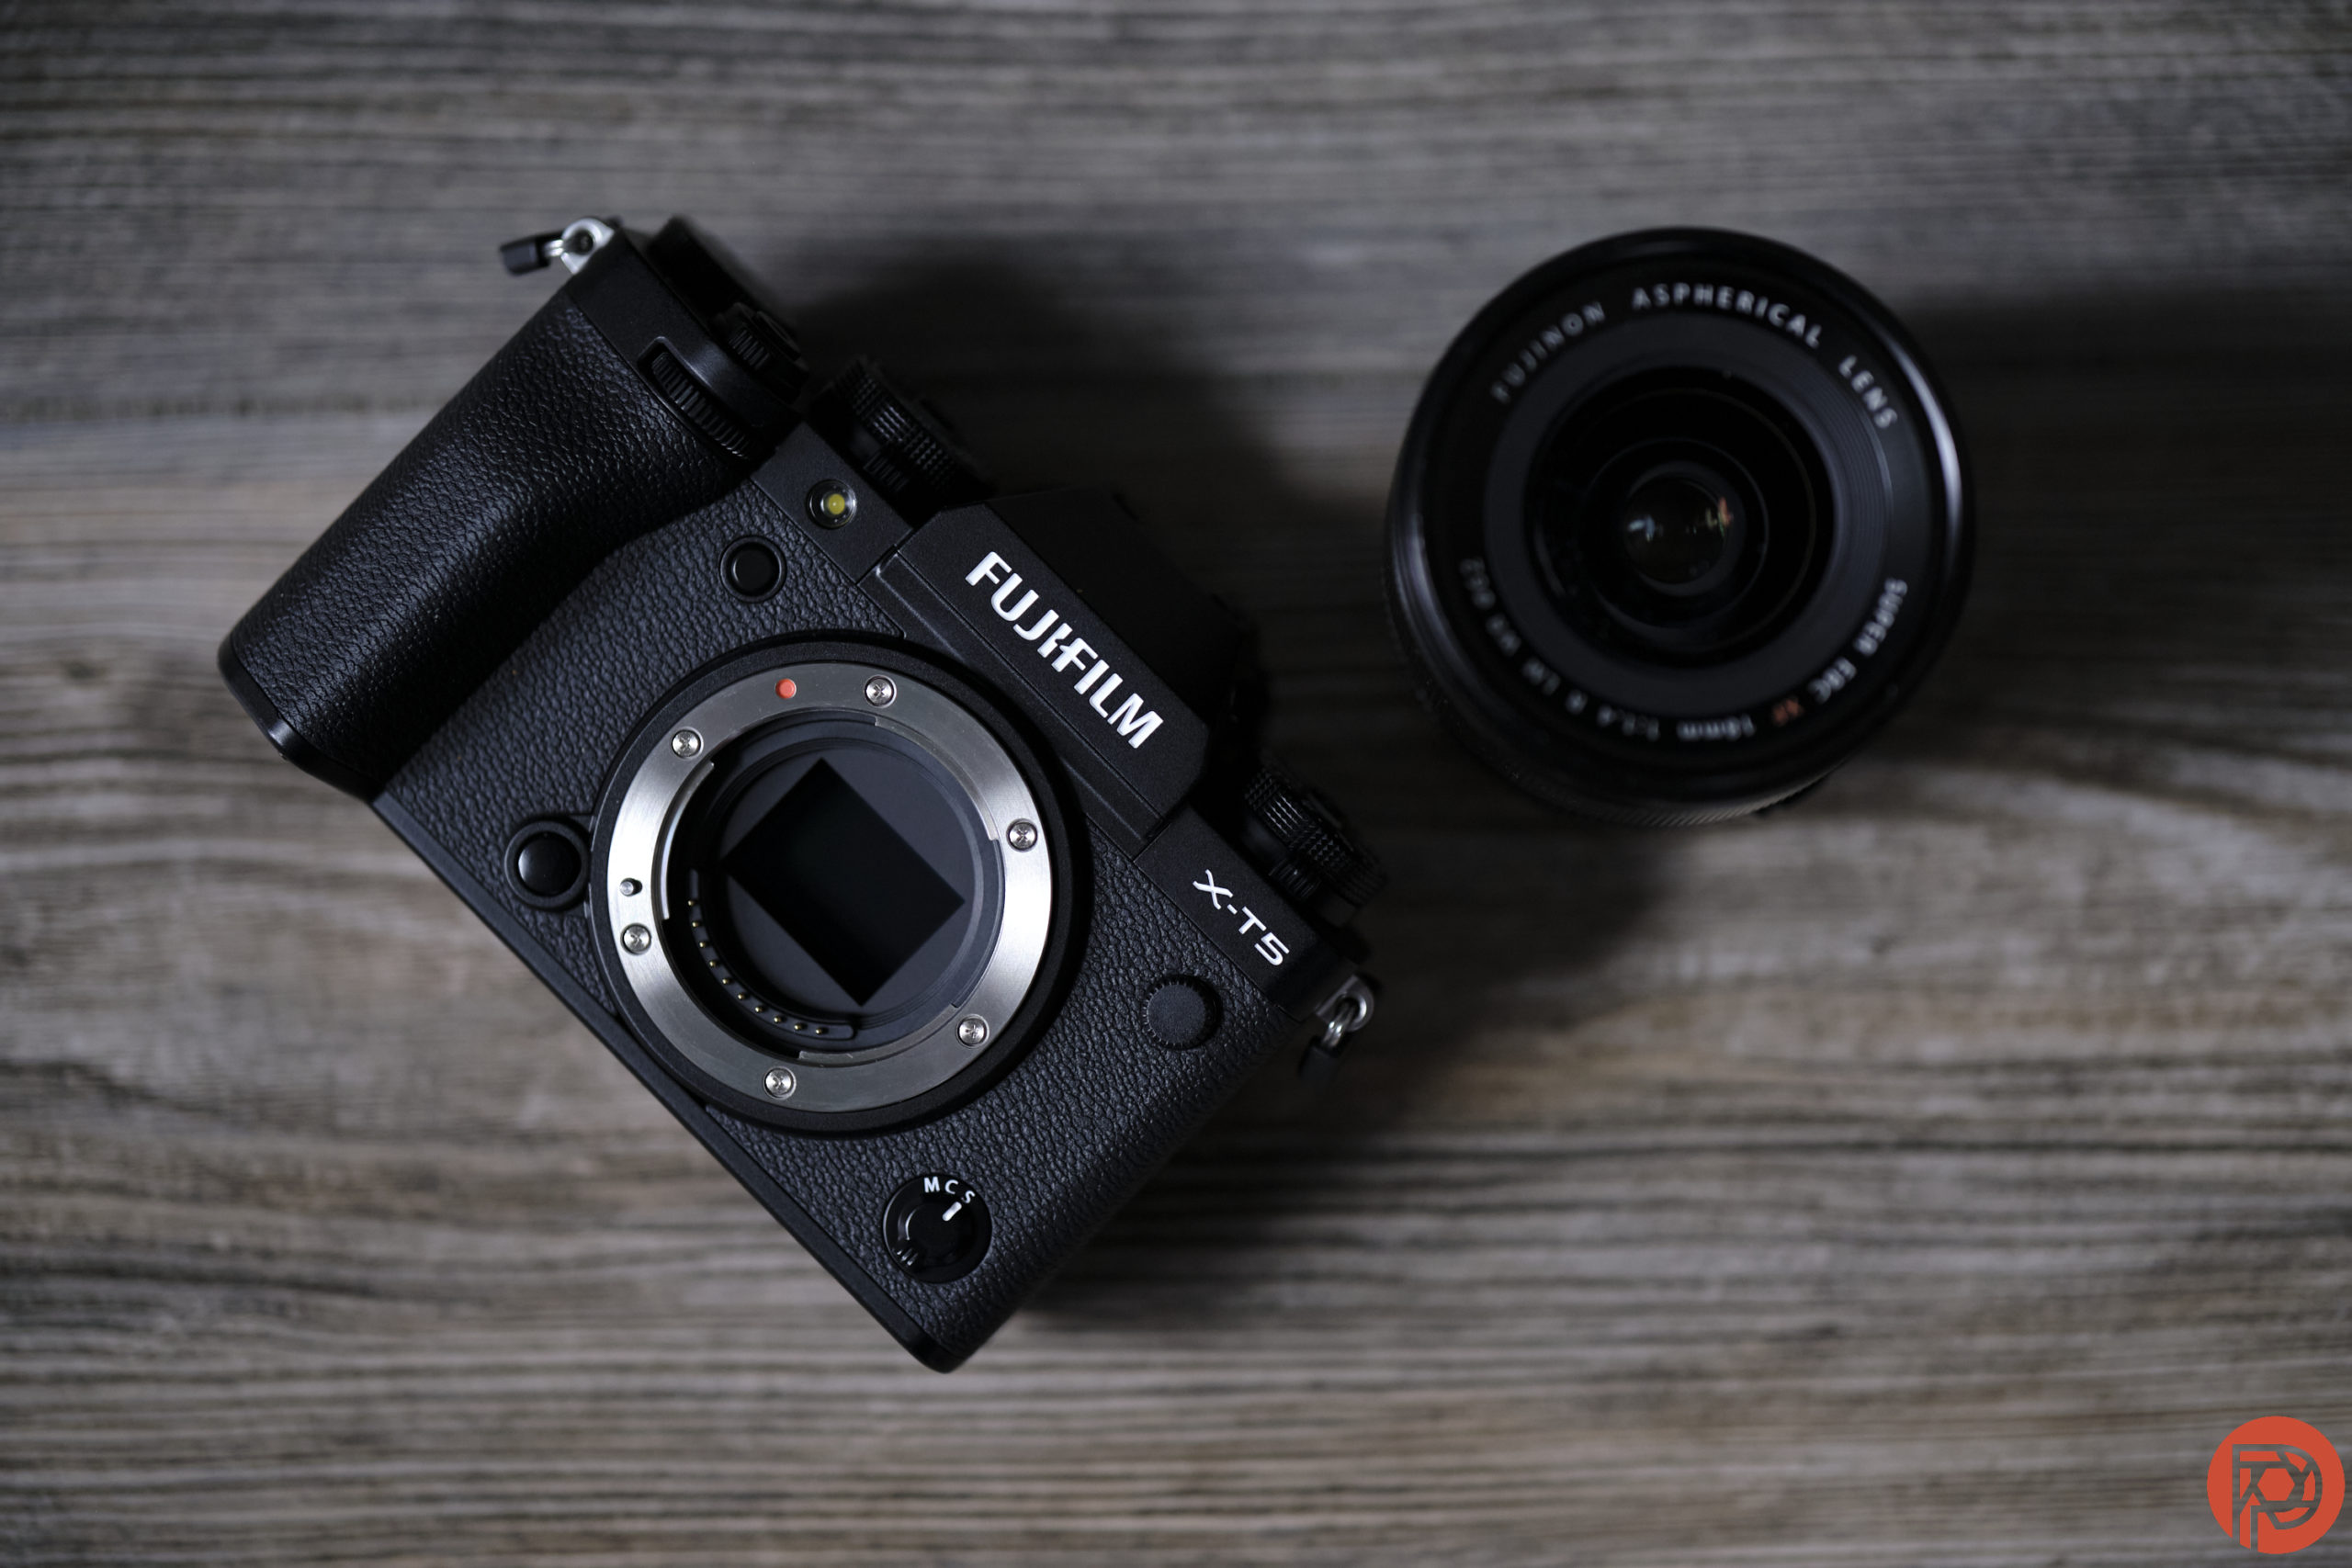 Fujifilm XT4 Review Update: I'm Still in Love with the Photos